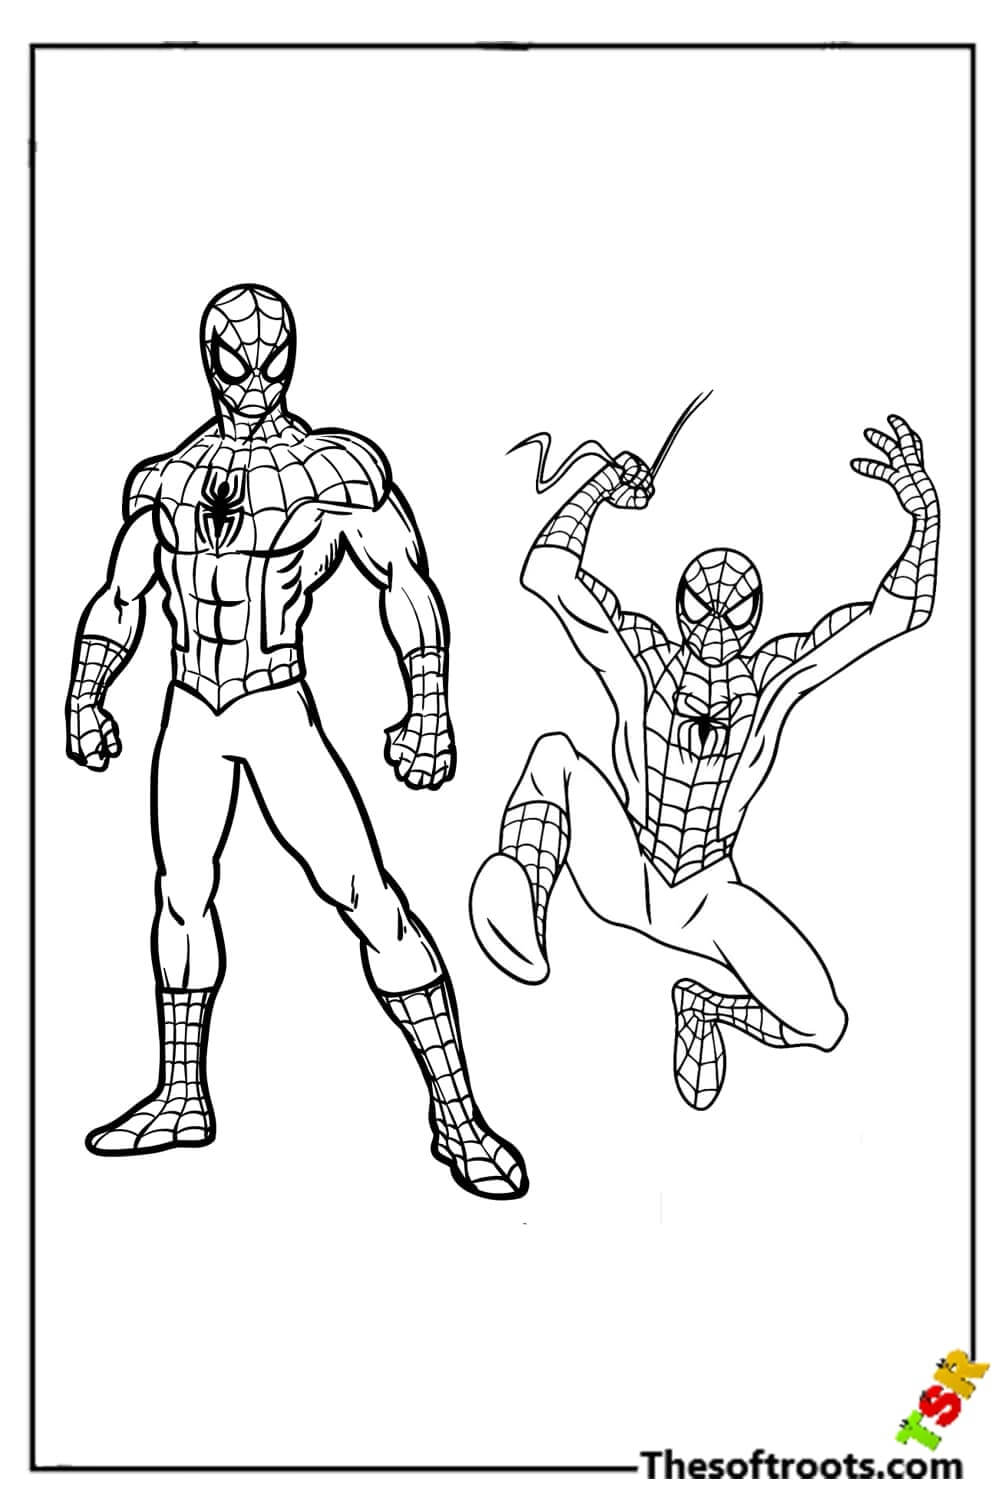 Two Spiderman coloring pages